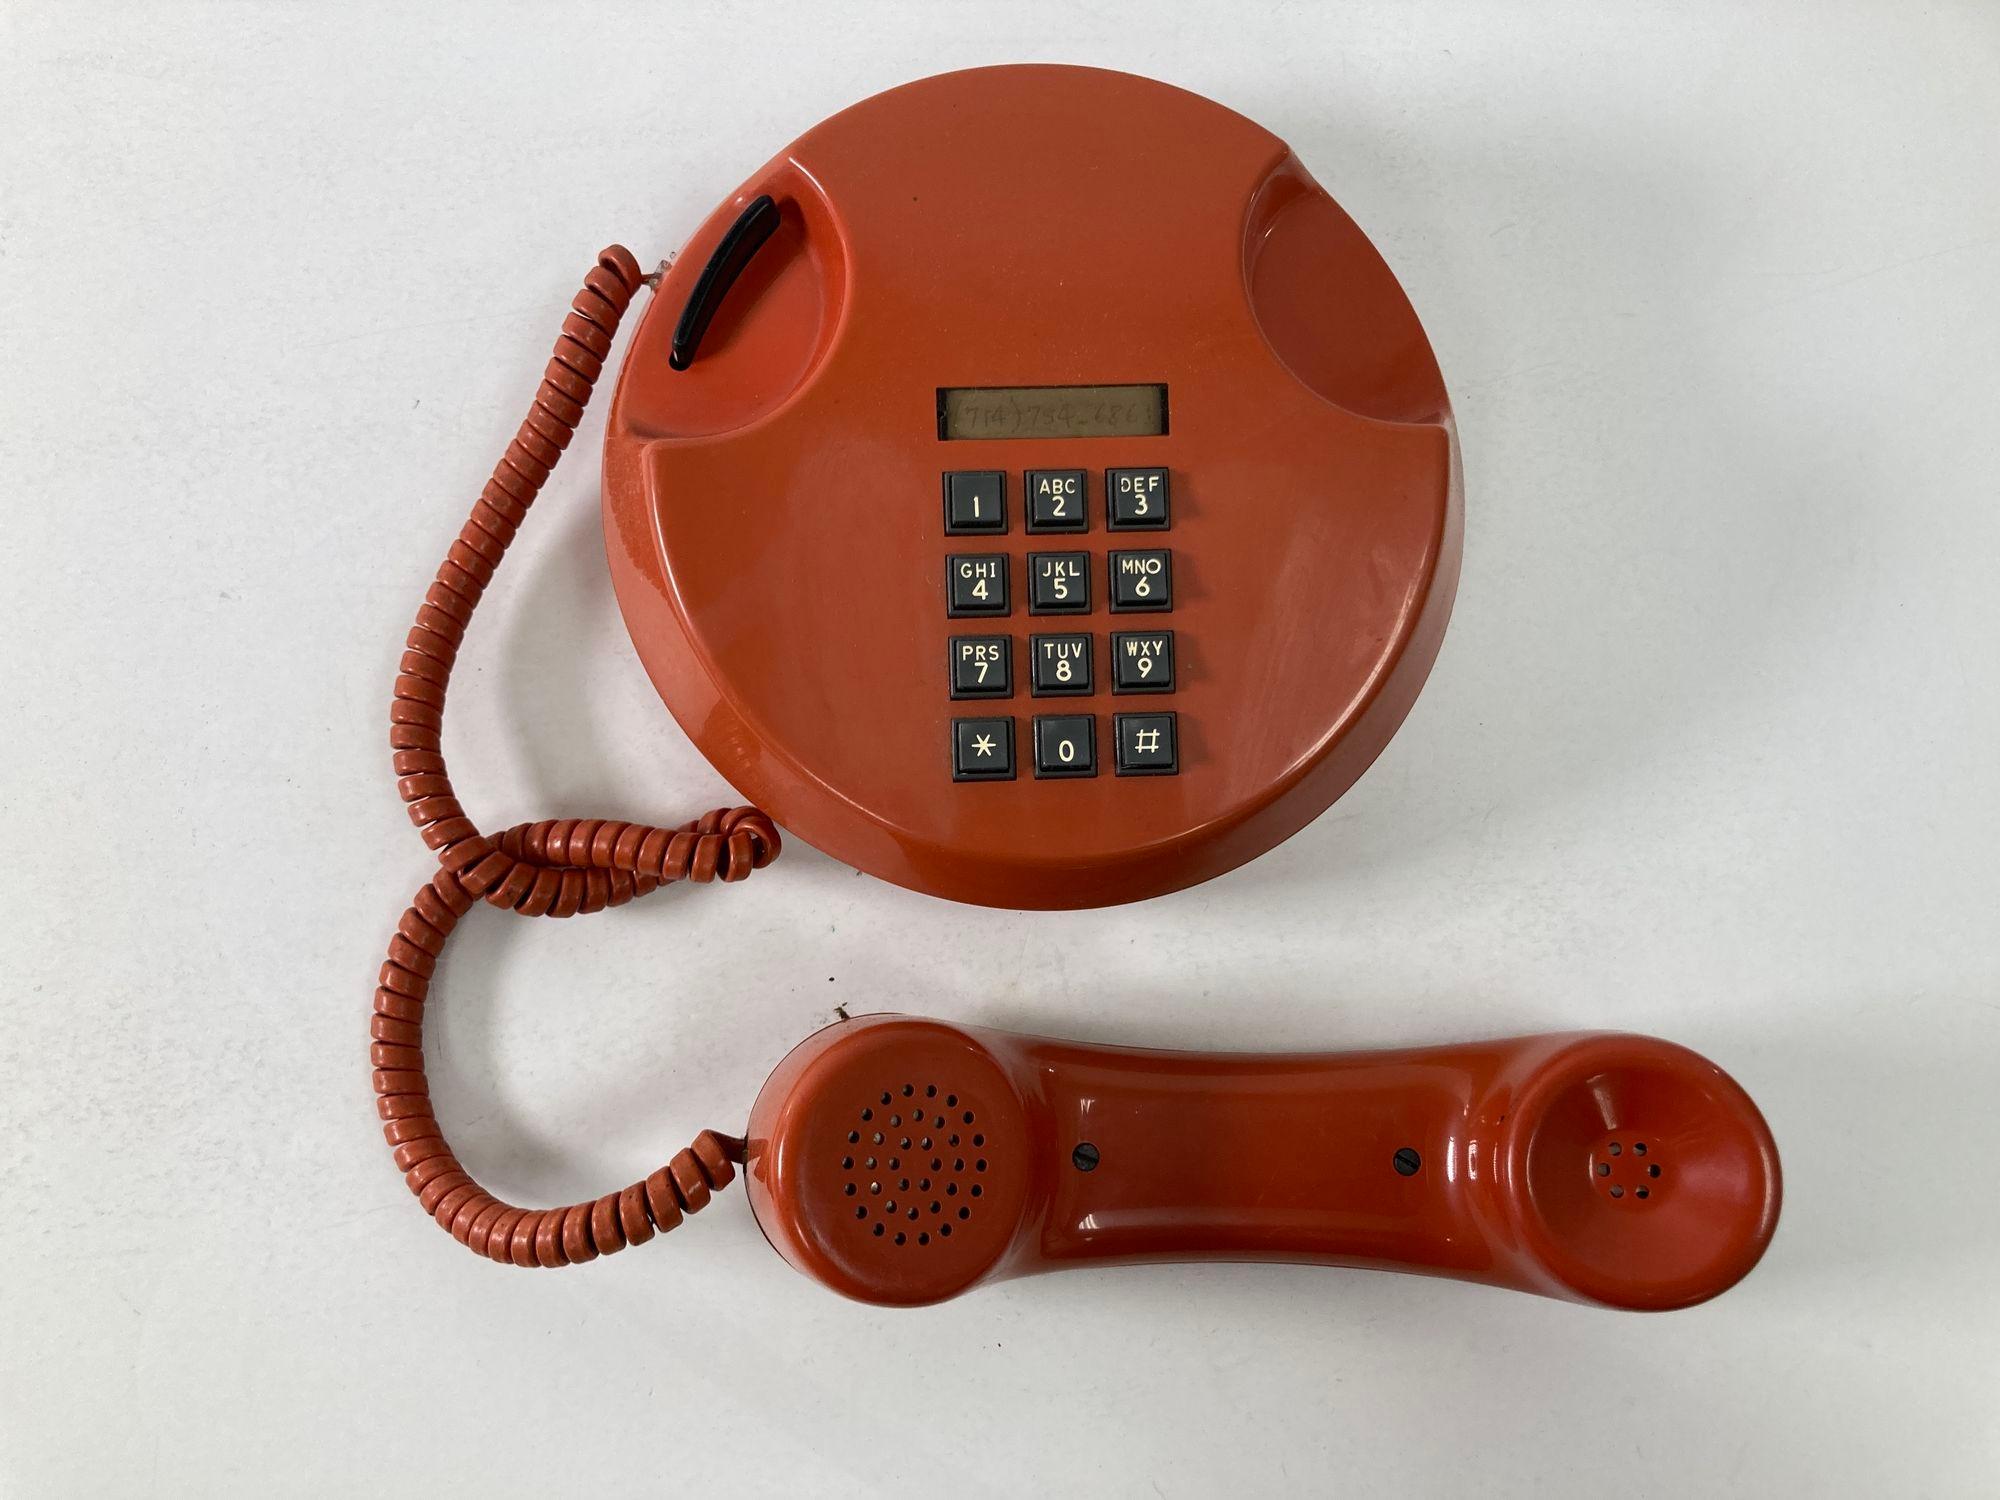 Vintage Retro Push-Button Round Telephone Burnt Orange Color from the, 70s 1